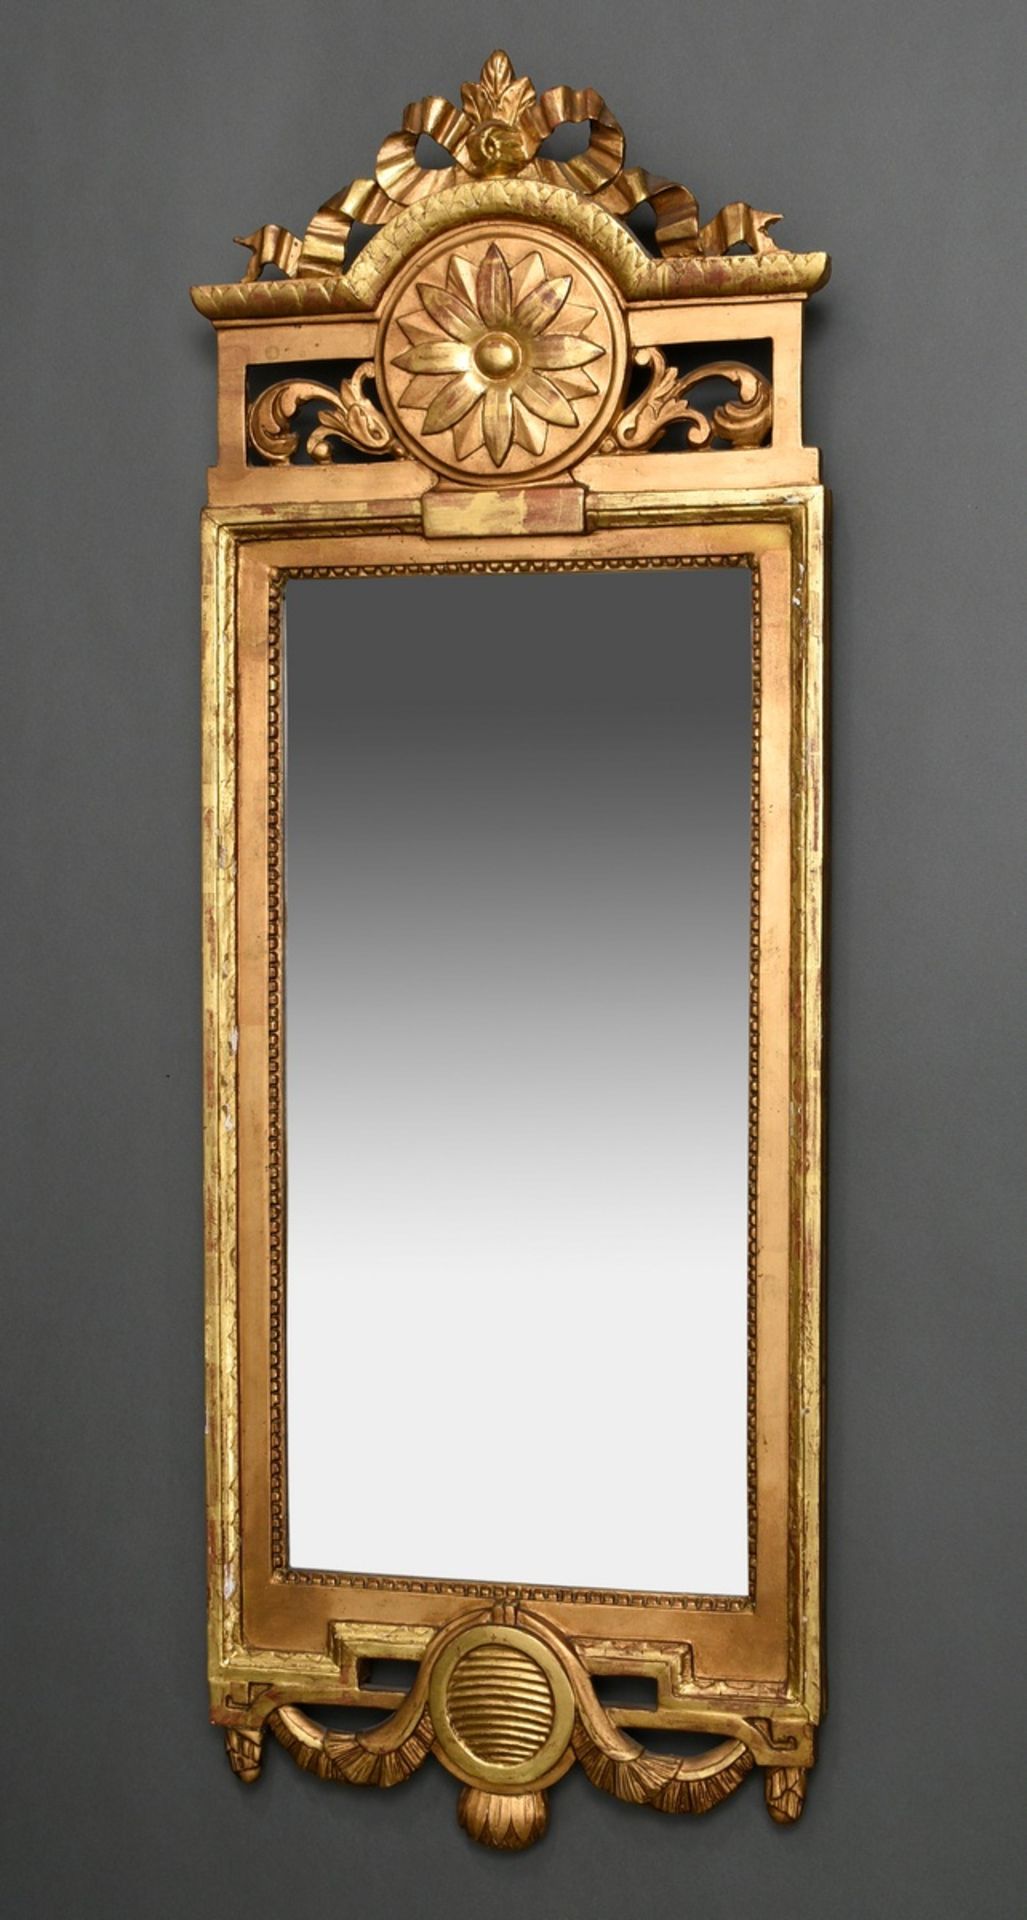 Louis XVI console mirror with rosette cartouche and bow finial as well as leaf hangings, c. 1780, c